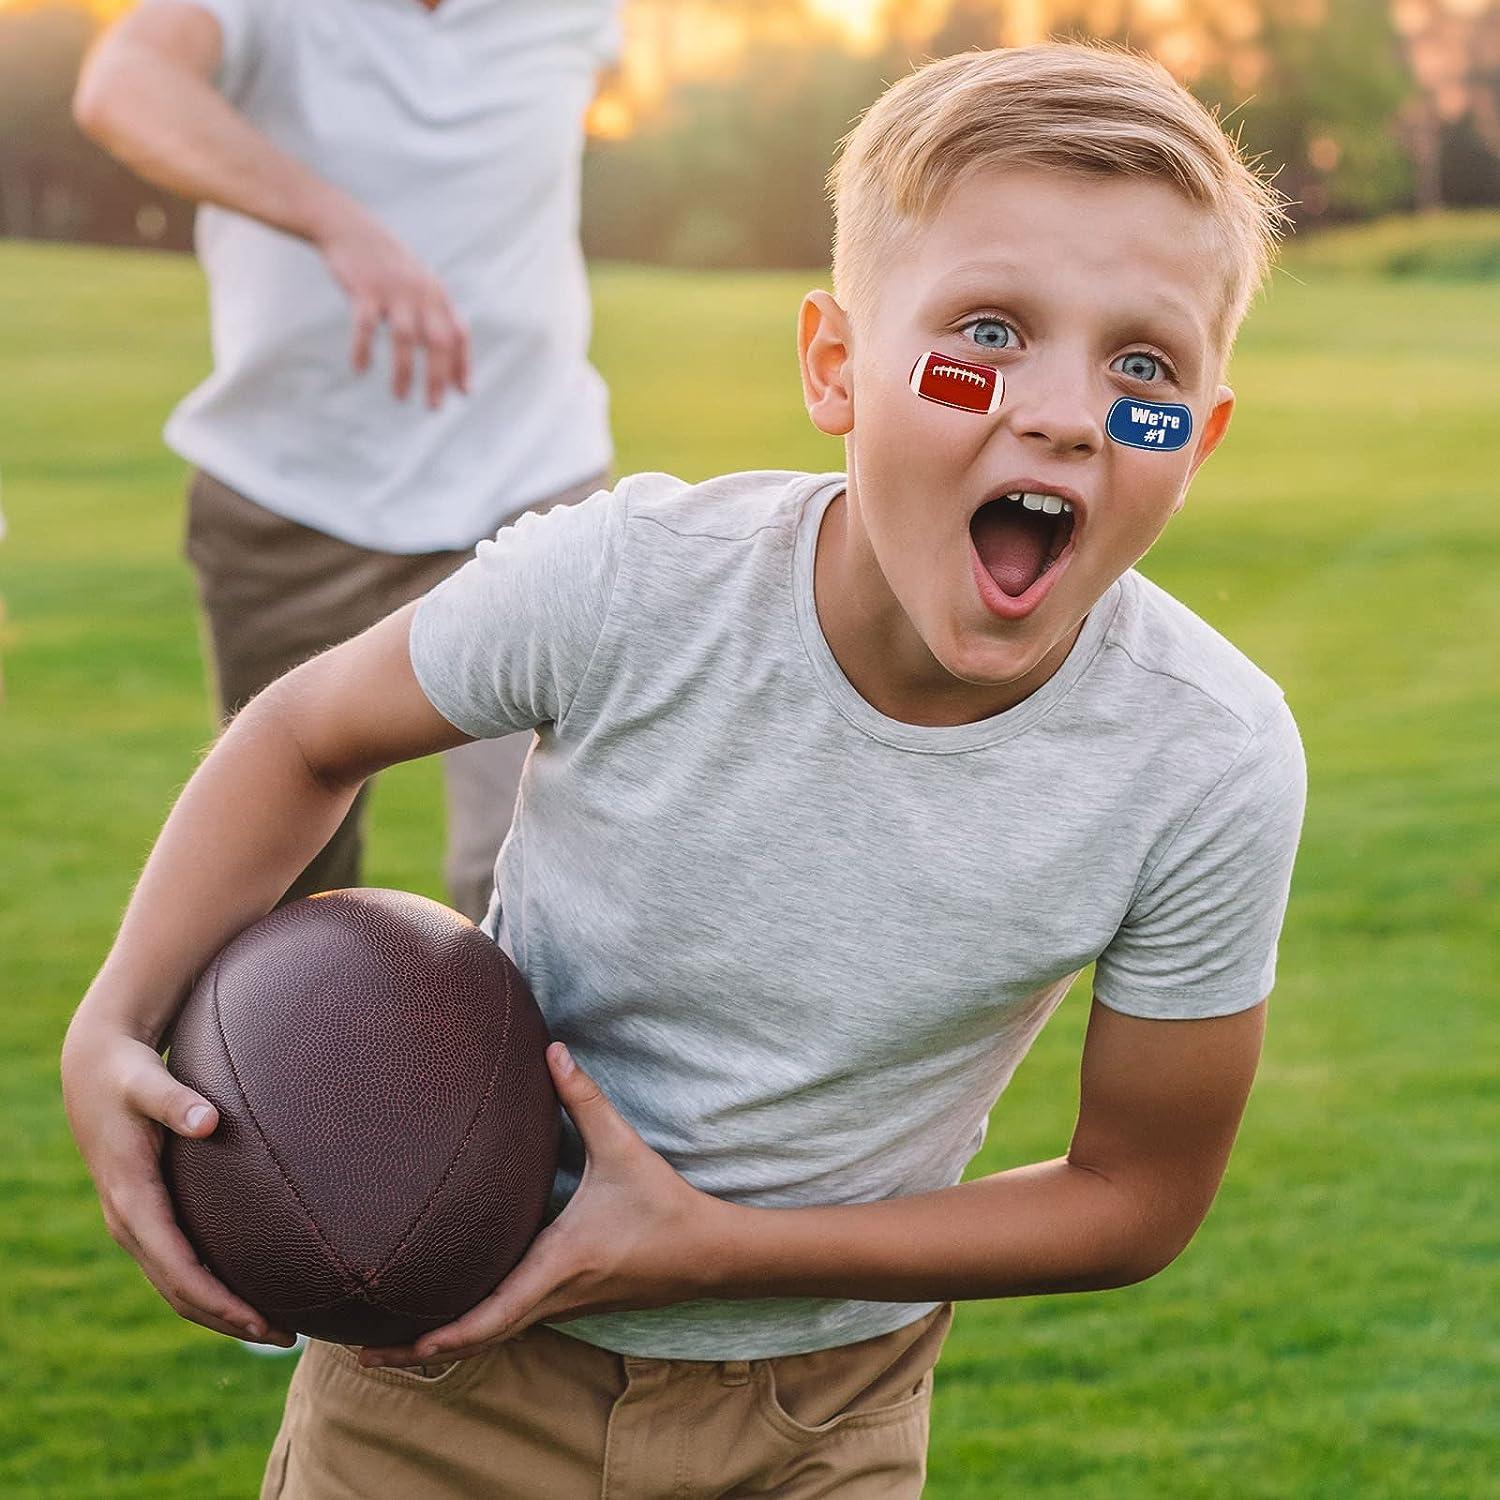 15 Sheets Football Temporary Stickers Kids Football Face Stickers Football  Under Eye Sticker Face Paint for Football Game Party Decoration Favor  Supplies